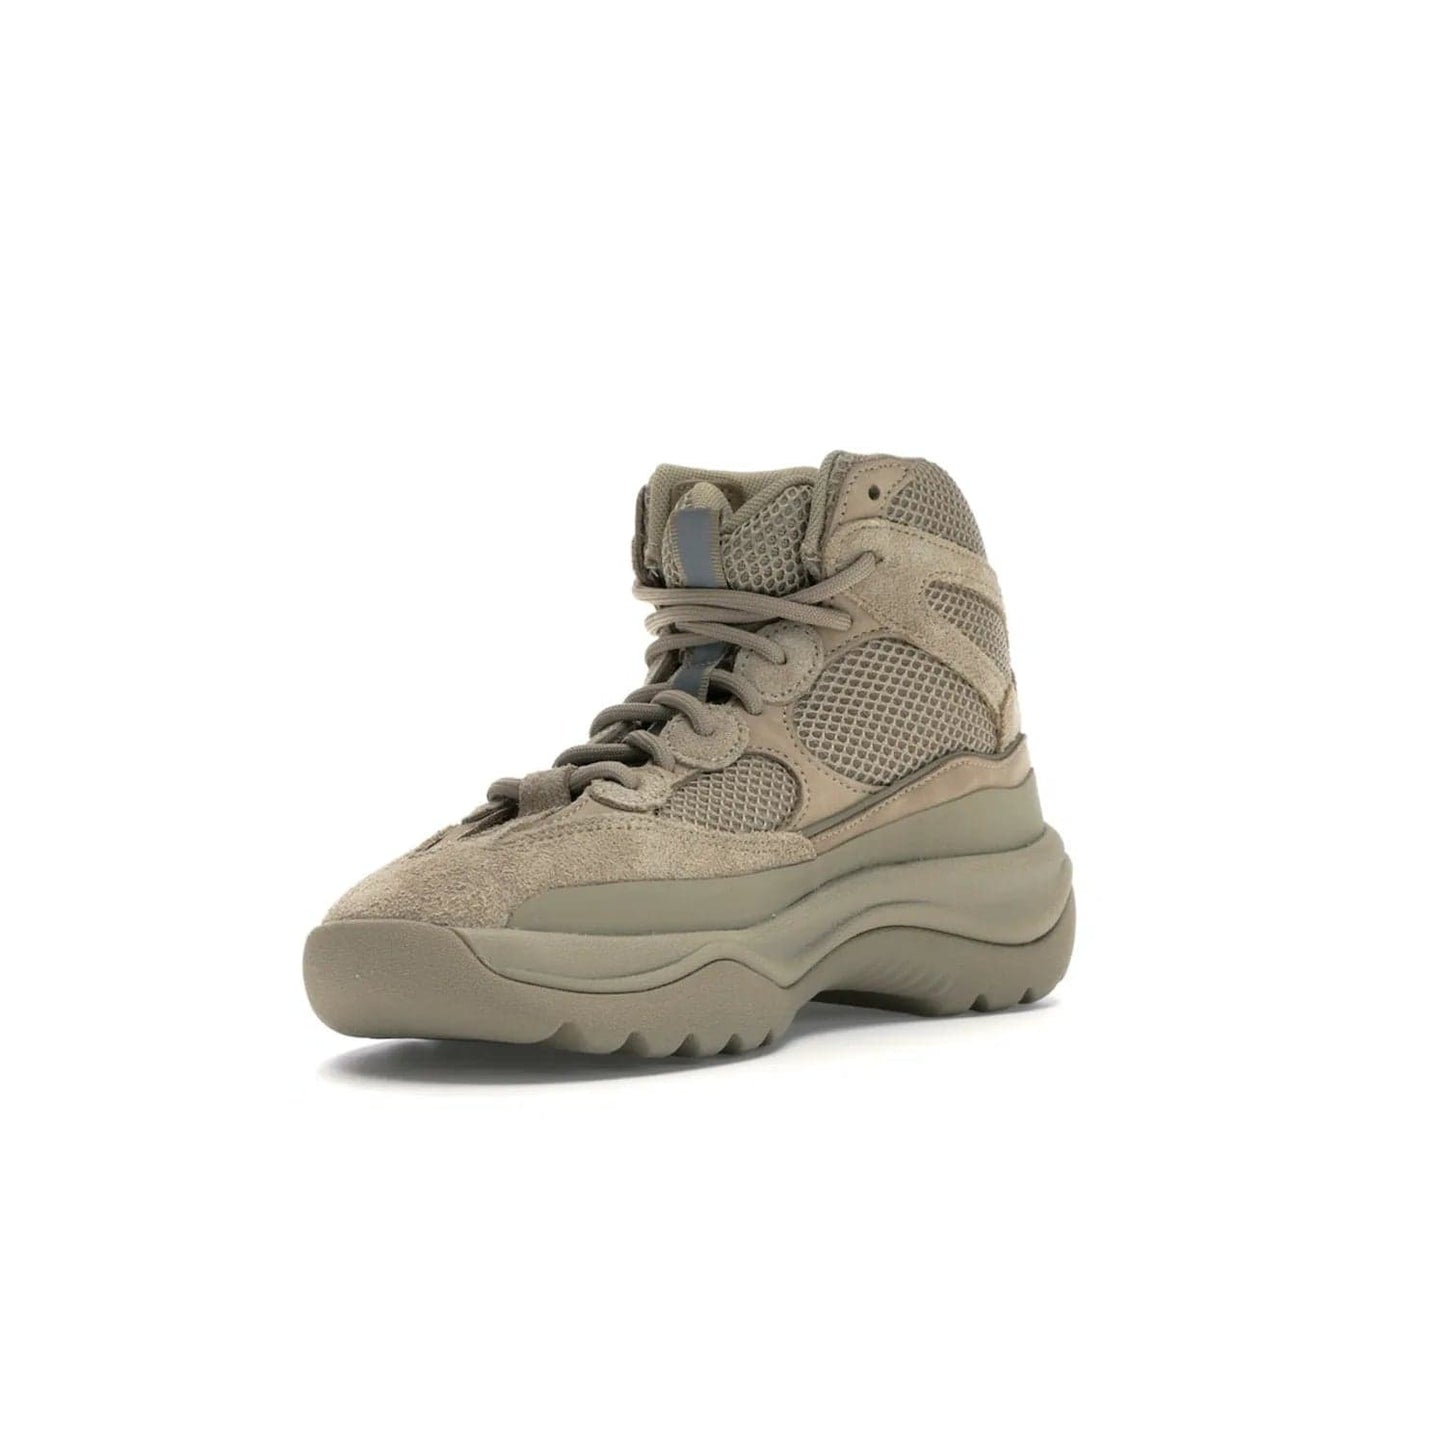 adidas Yeezy Desert Boot Rock - Image 14 - Only at www.BallersClubKickz.com - #
This season, make a fashion statement with the adidas Yeezy Desert Boot Rock. Nubuck and suede upper offers tonal style while the grooved sole provides traction and stability. Get yours in April 2019.